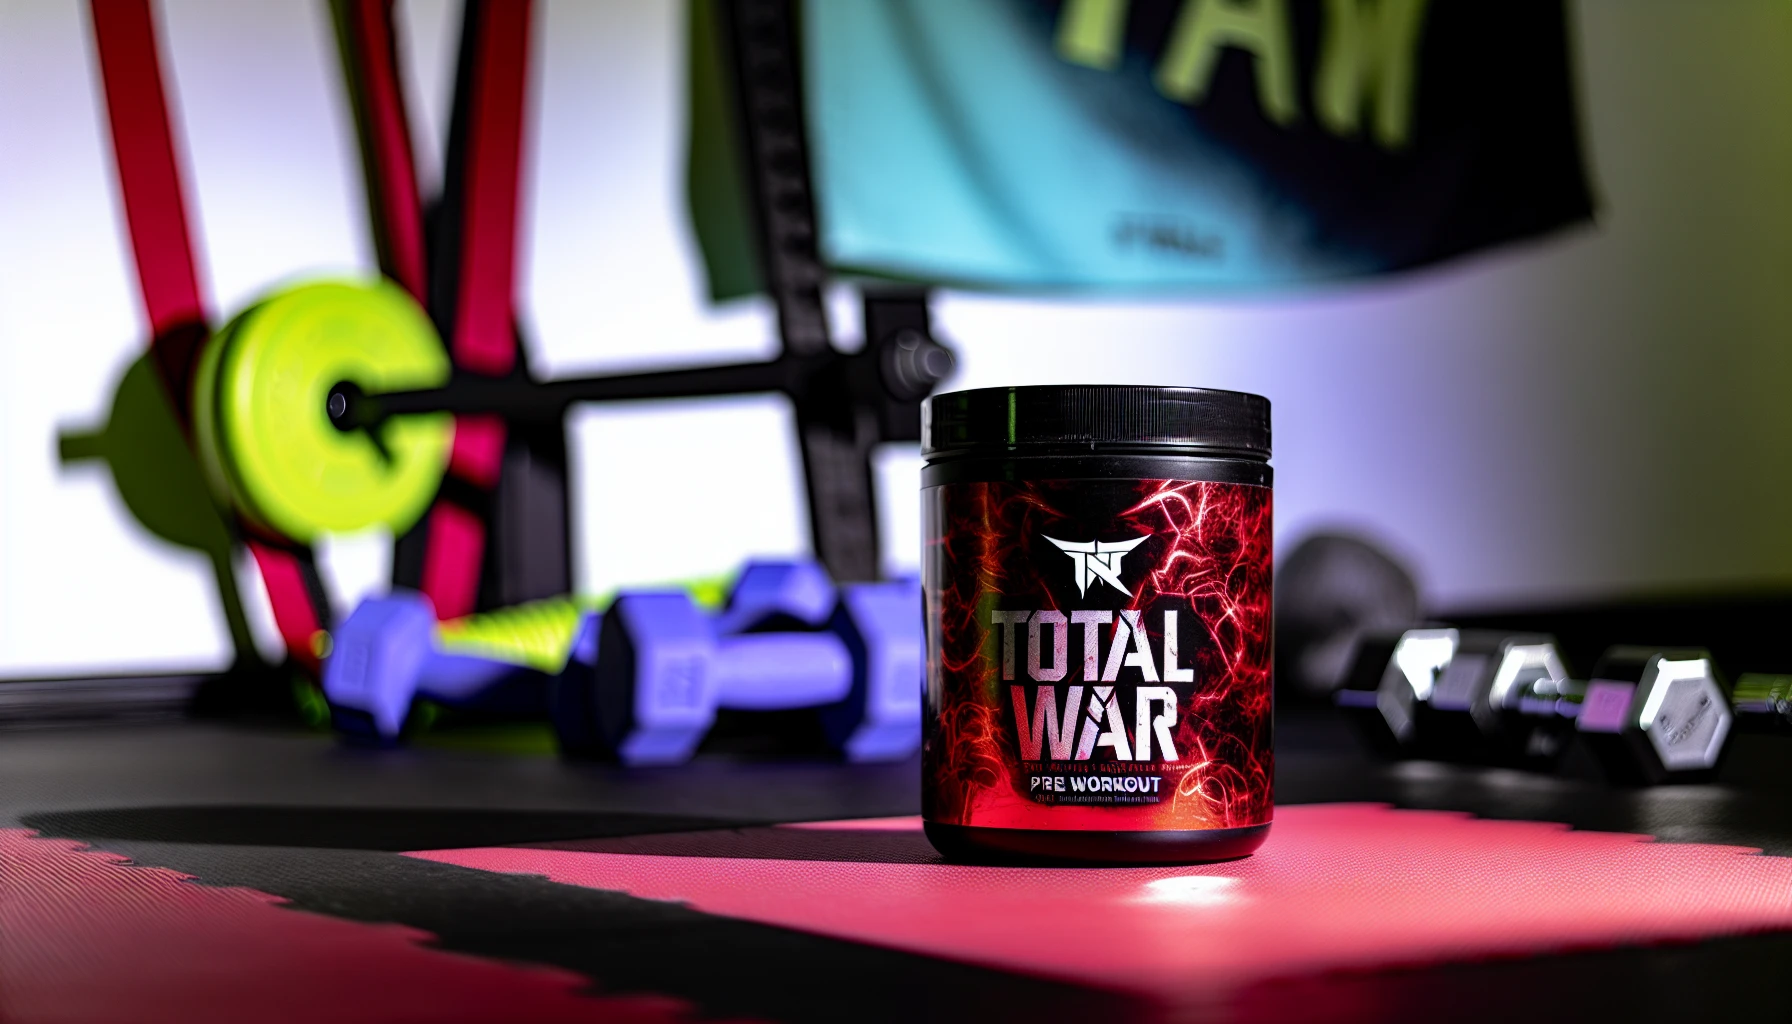 Total War Pre Workout container with energetic background